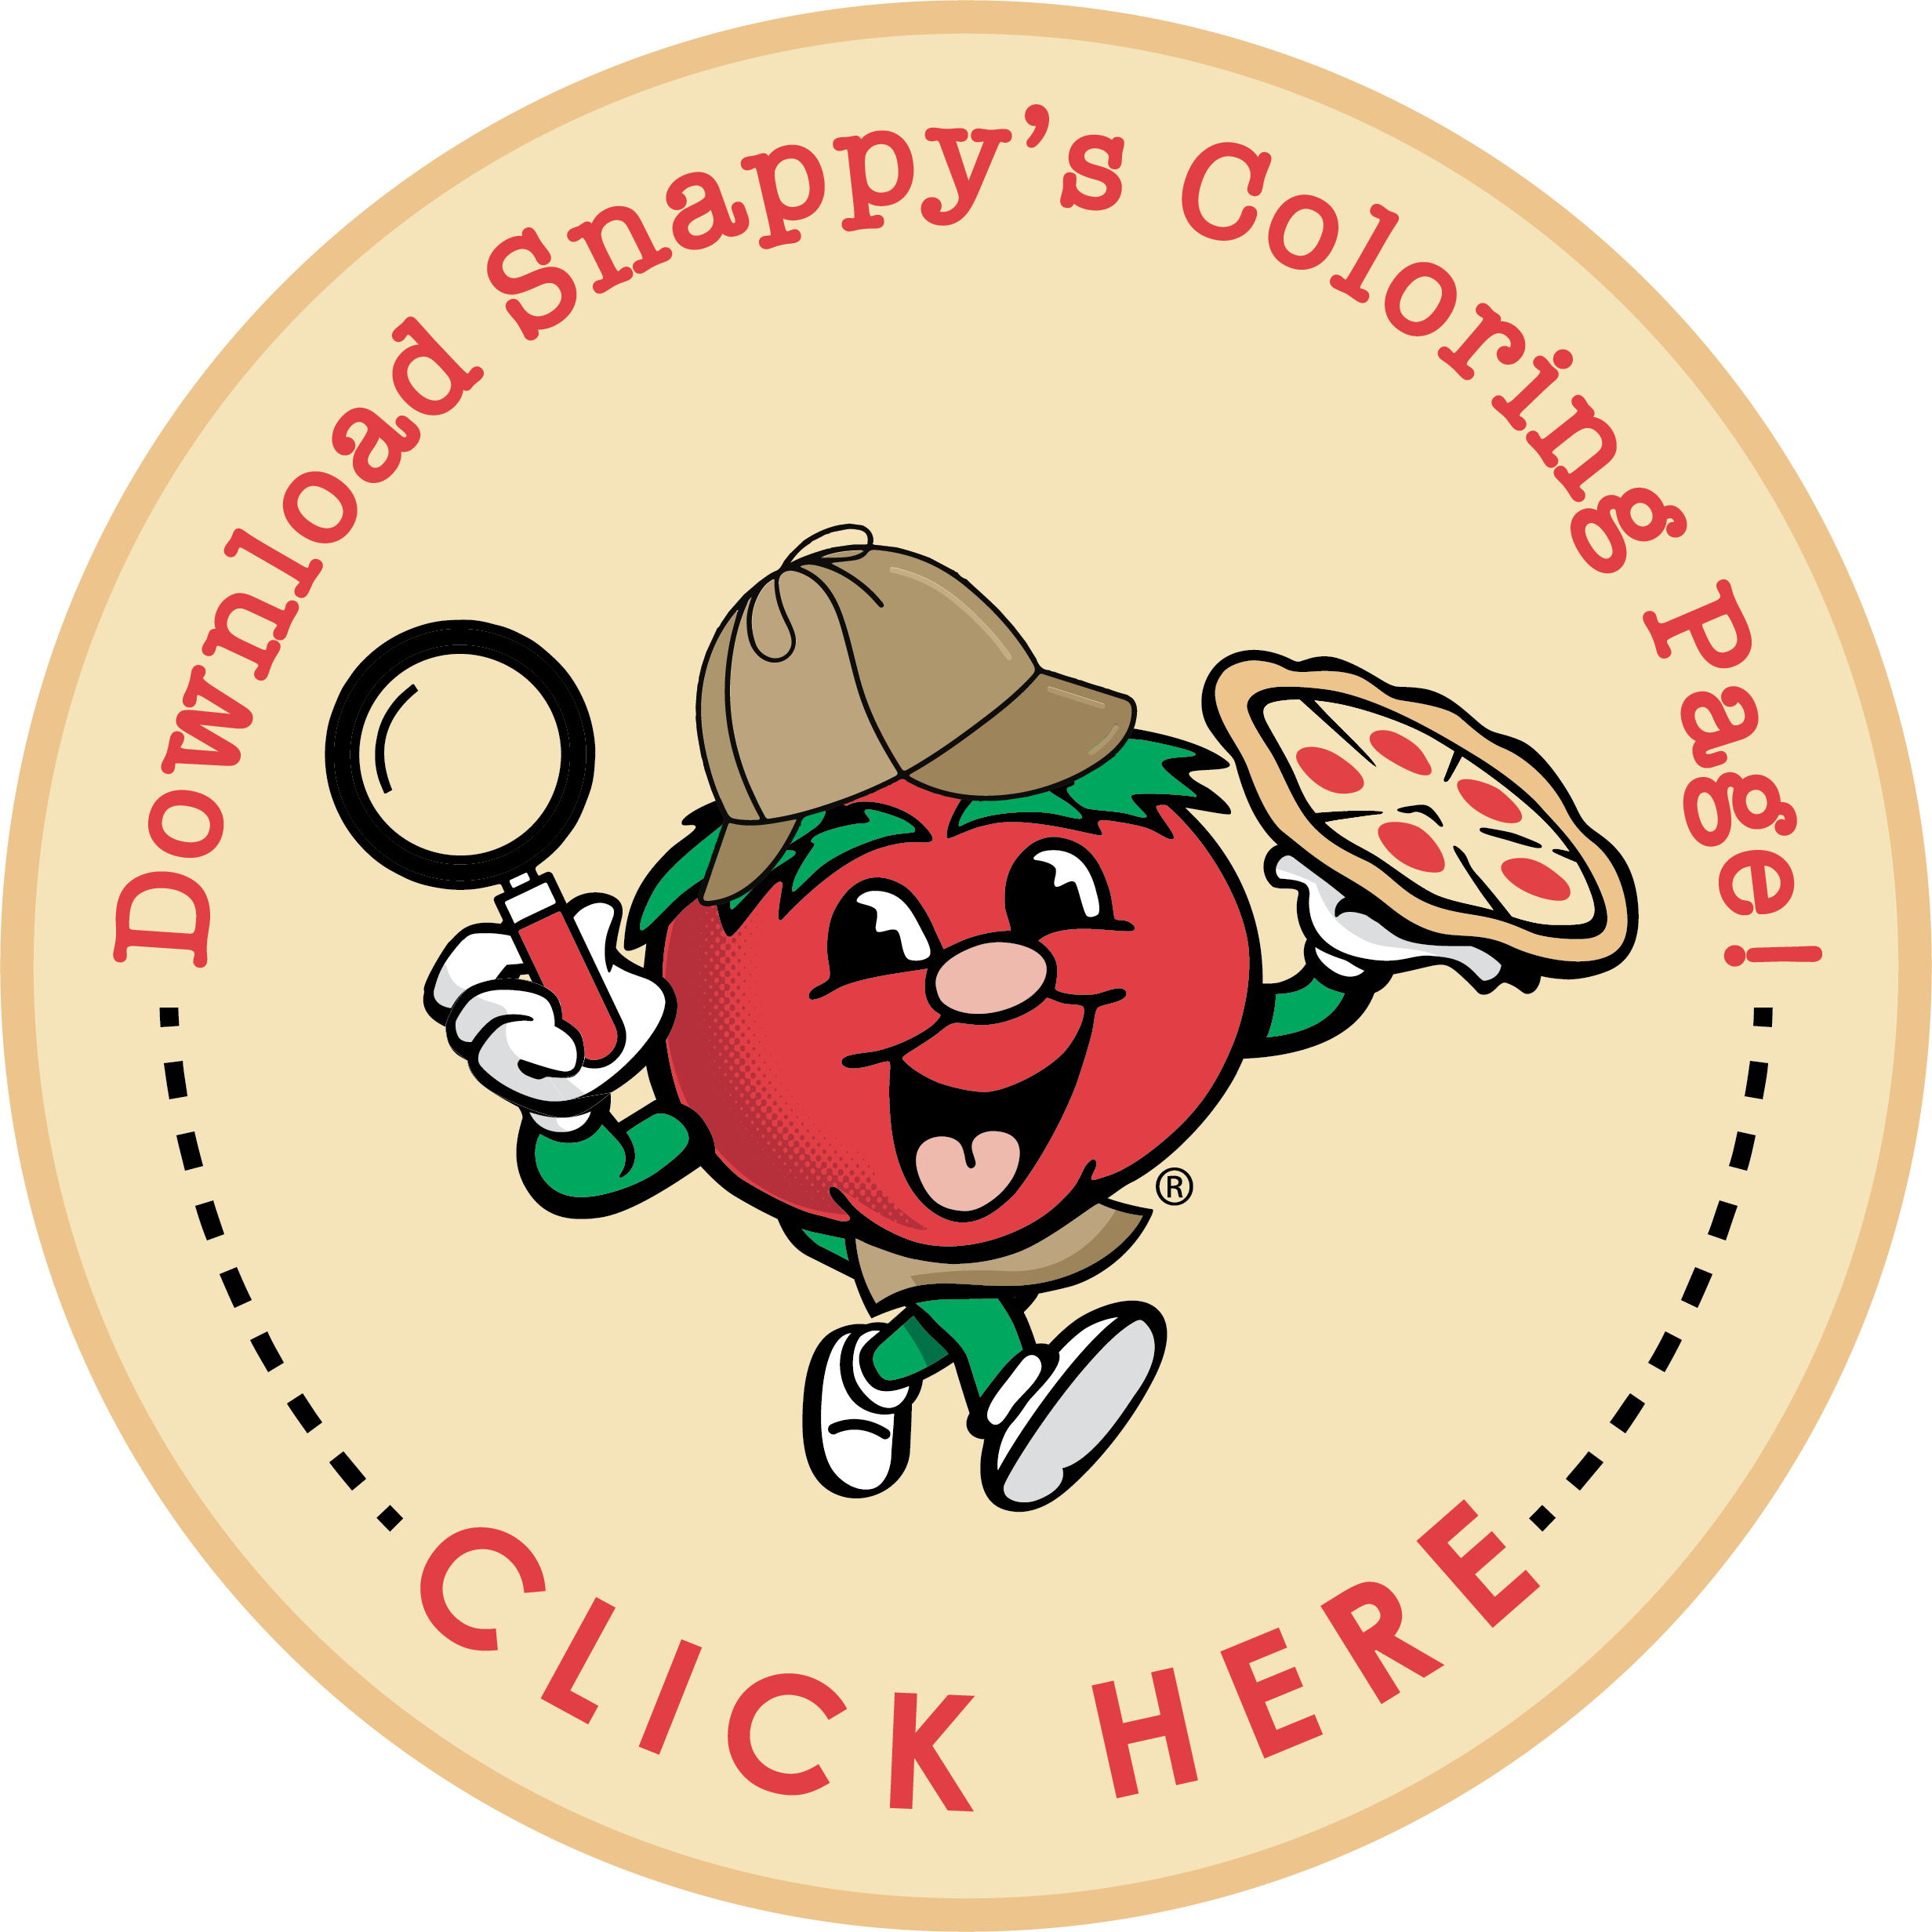 Agent of Change - Unity Pizza 2020
Snappy Tomato Pizza - Corporate Offices - Call 859.525.4680 - Online Menu - Carryout and Delivery
"Add Cheddar and Make It Better!" 
Bullying Prevention Handbook